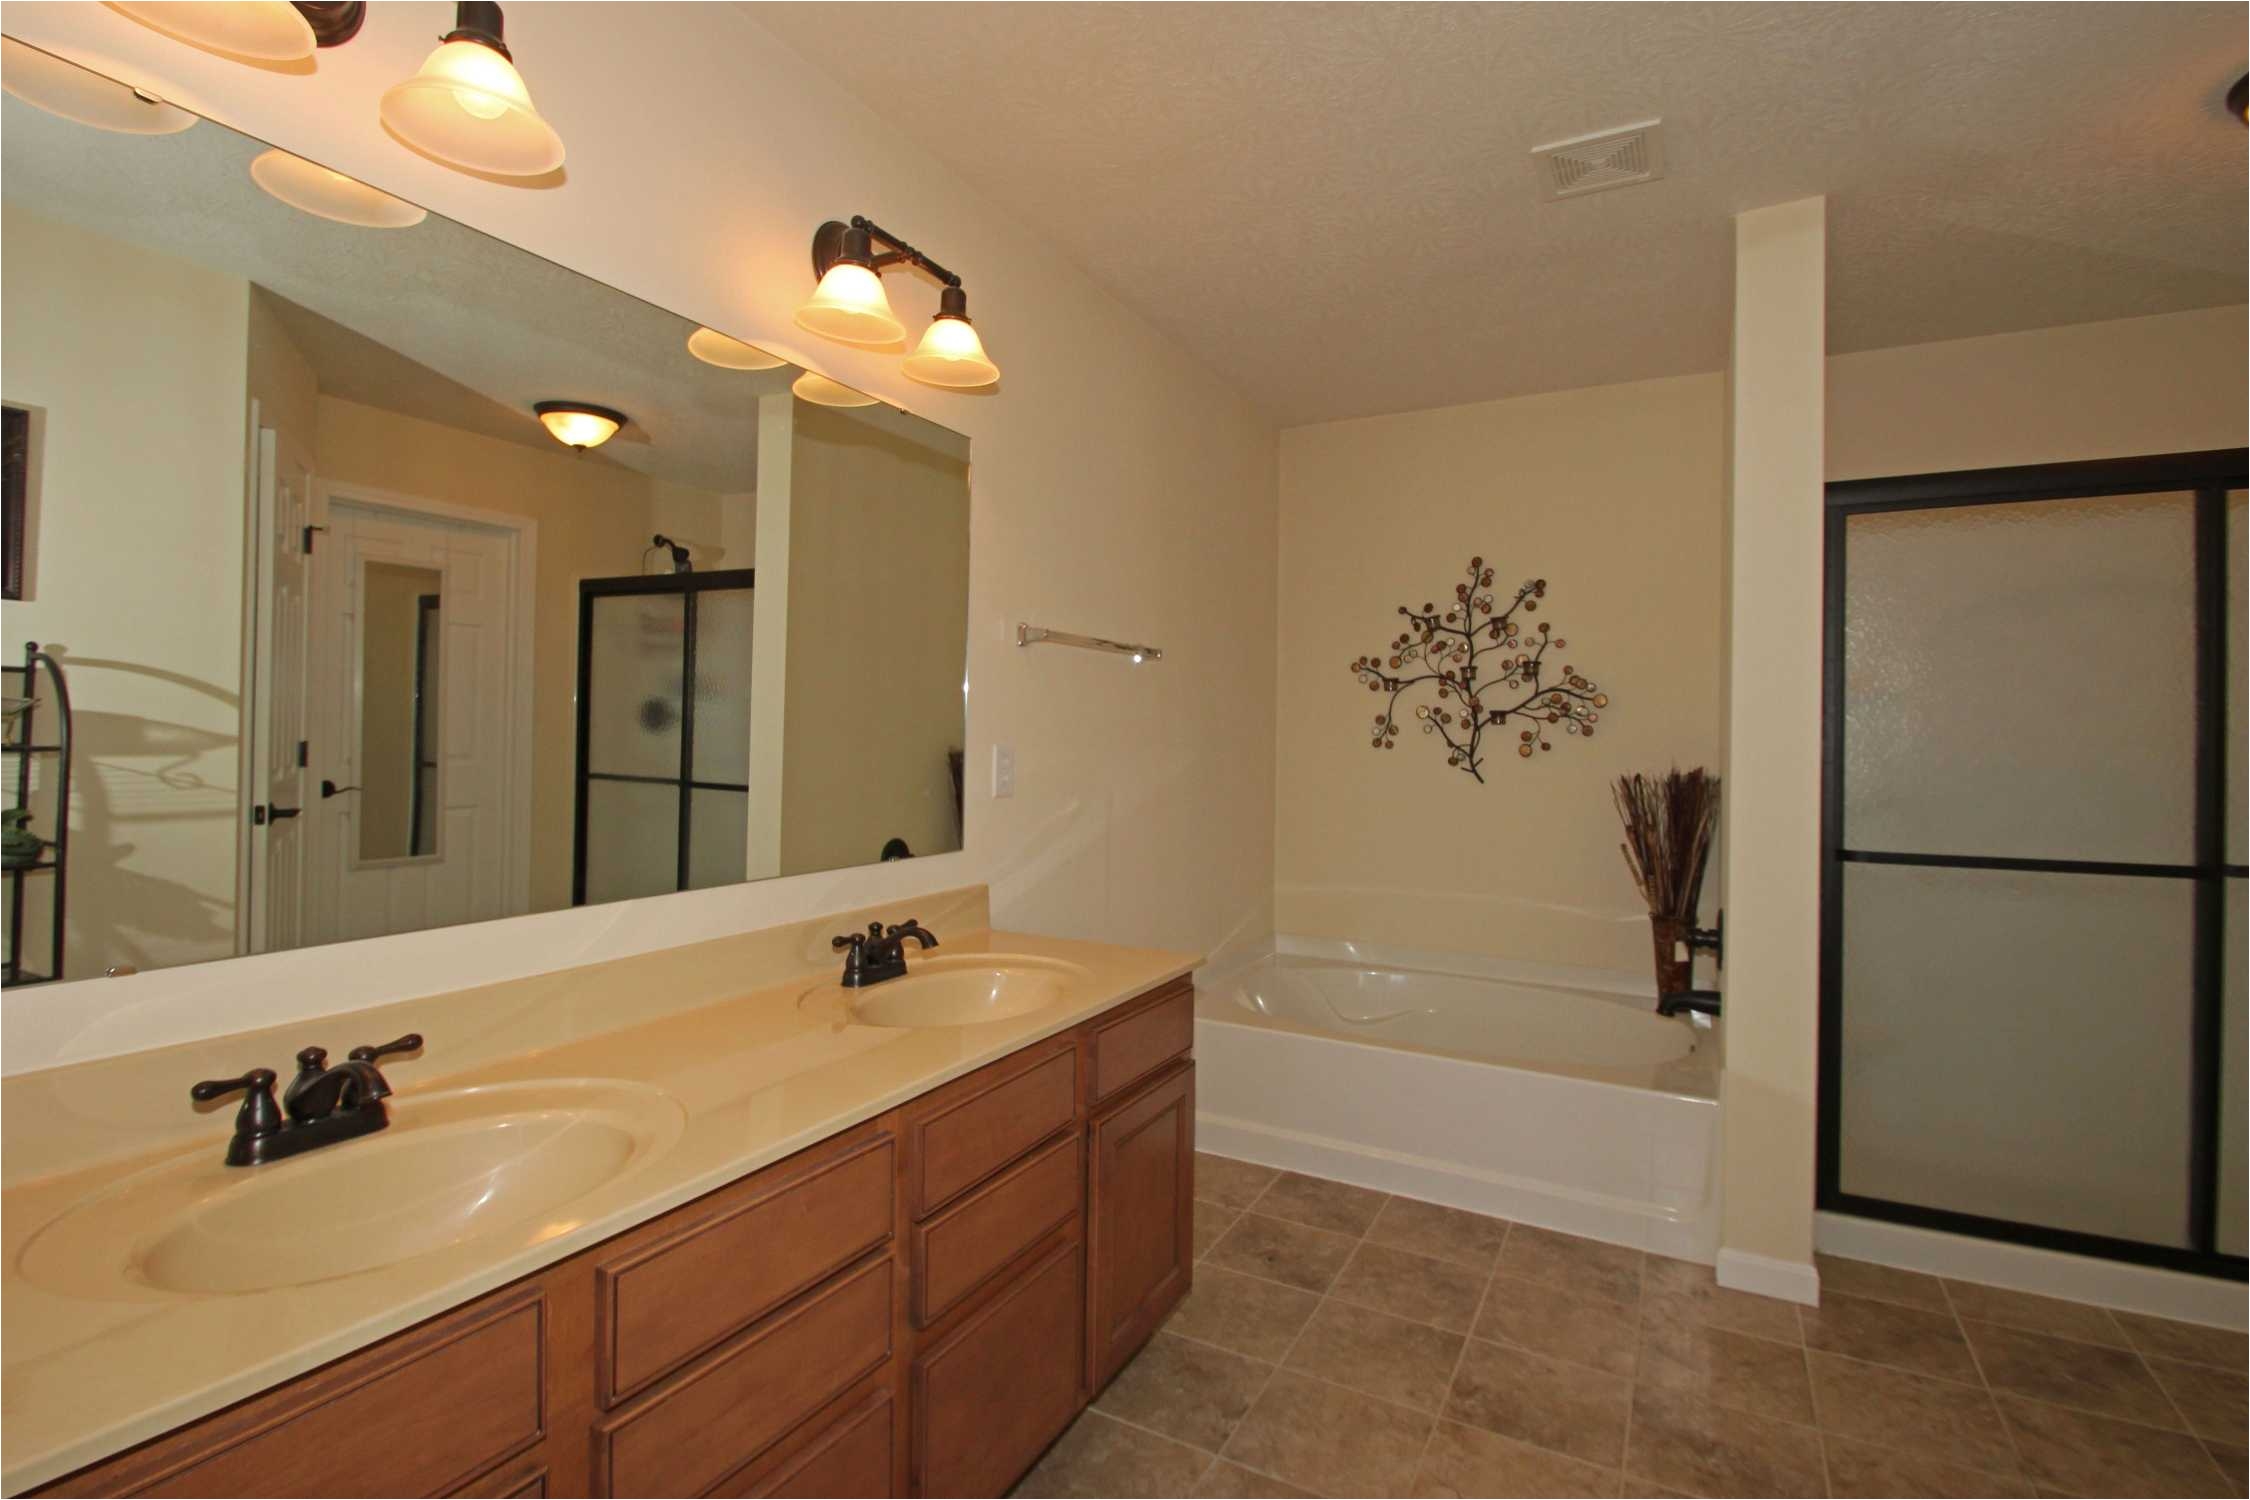 master bathroom with stand up shower soaker tub layout only need one sink though